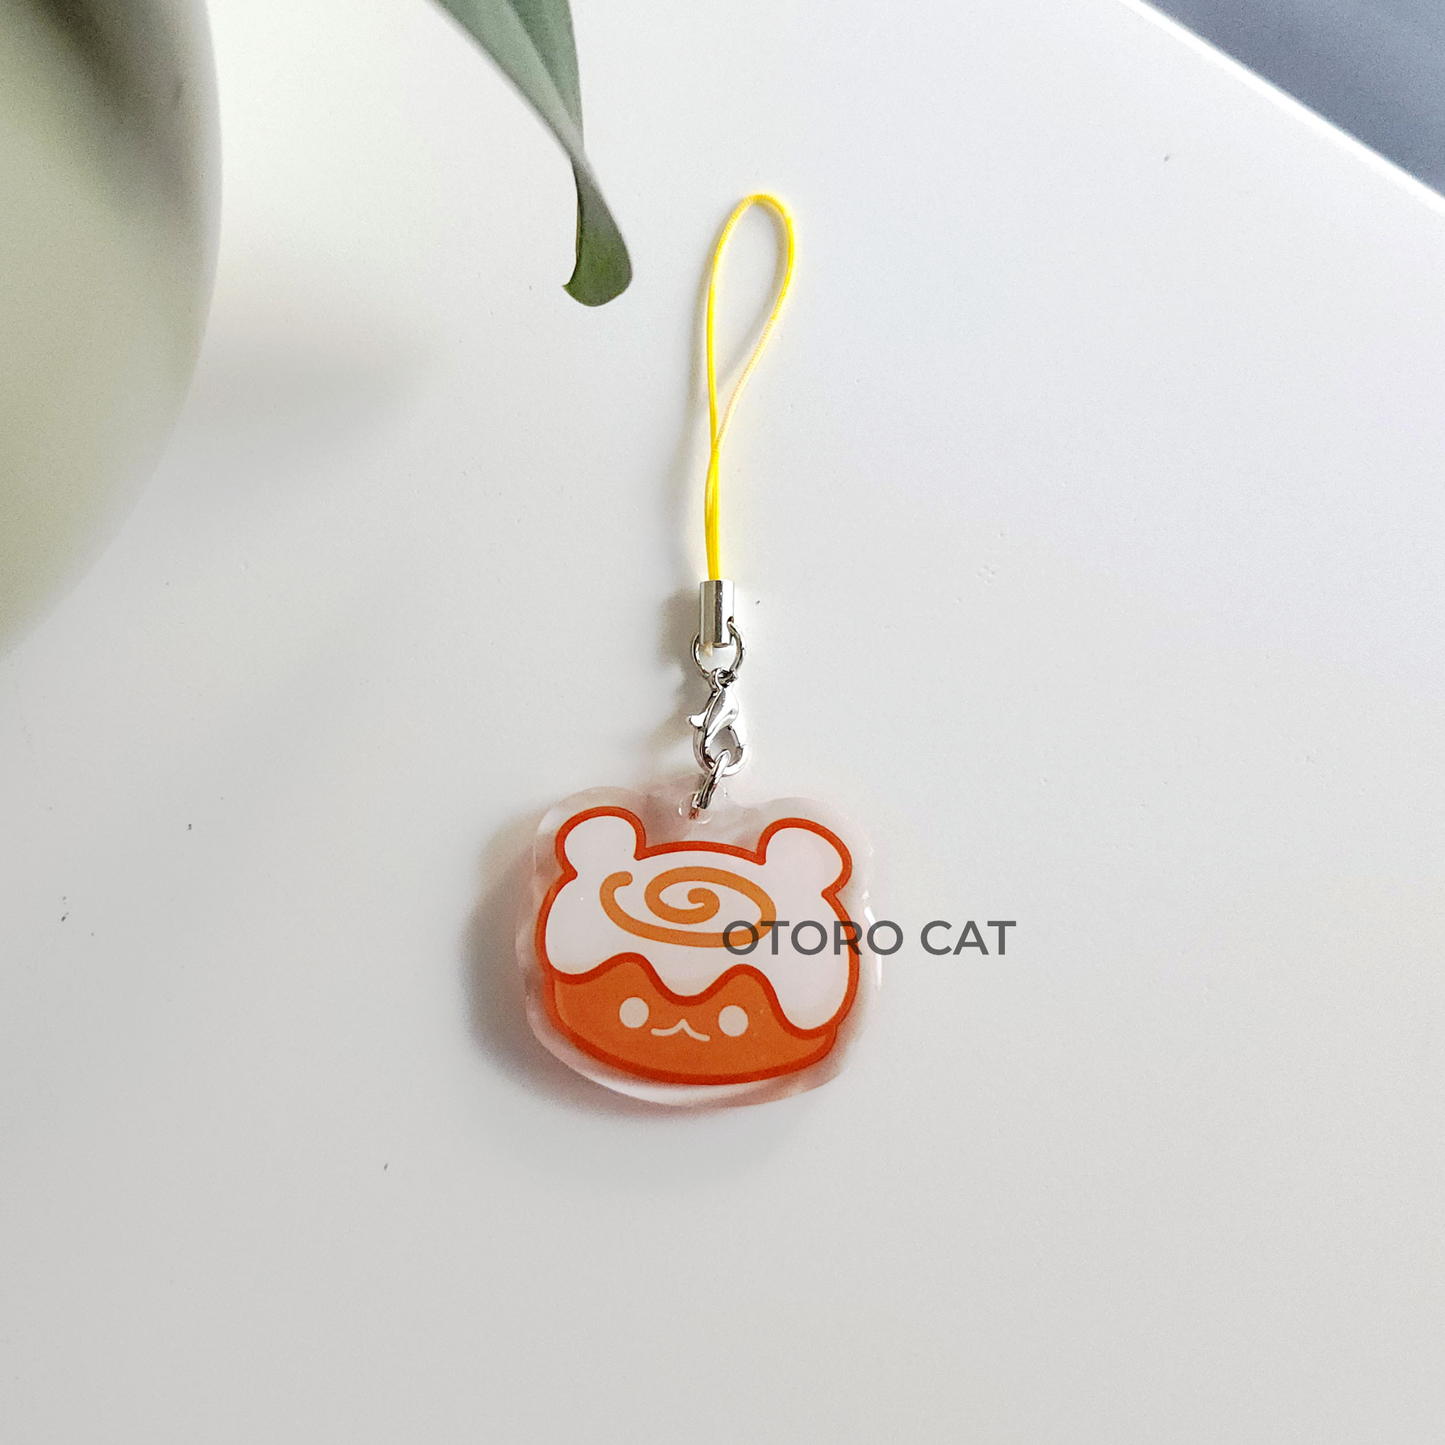 Adorable Cinnamon Roll Bear Phone Charm - Sweeten Your Accessories with Cuddly Charm